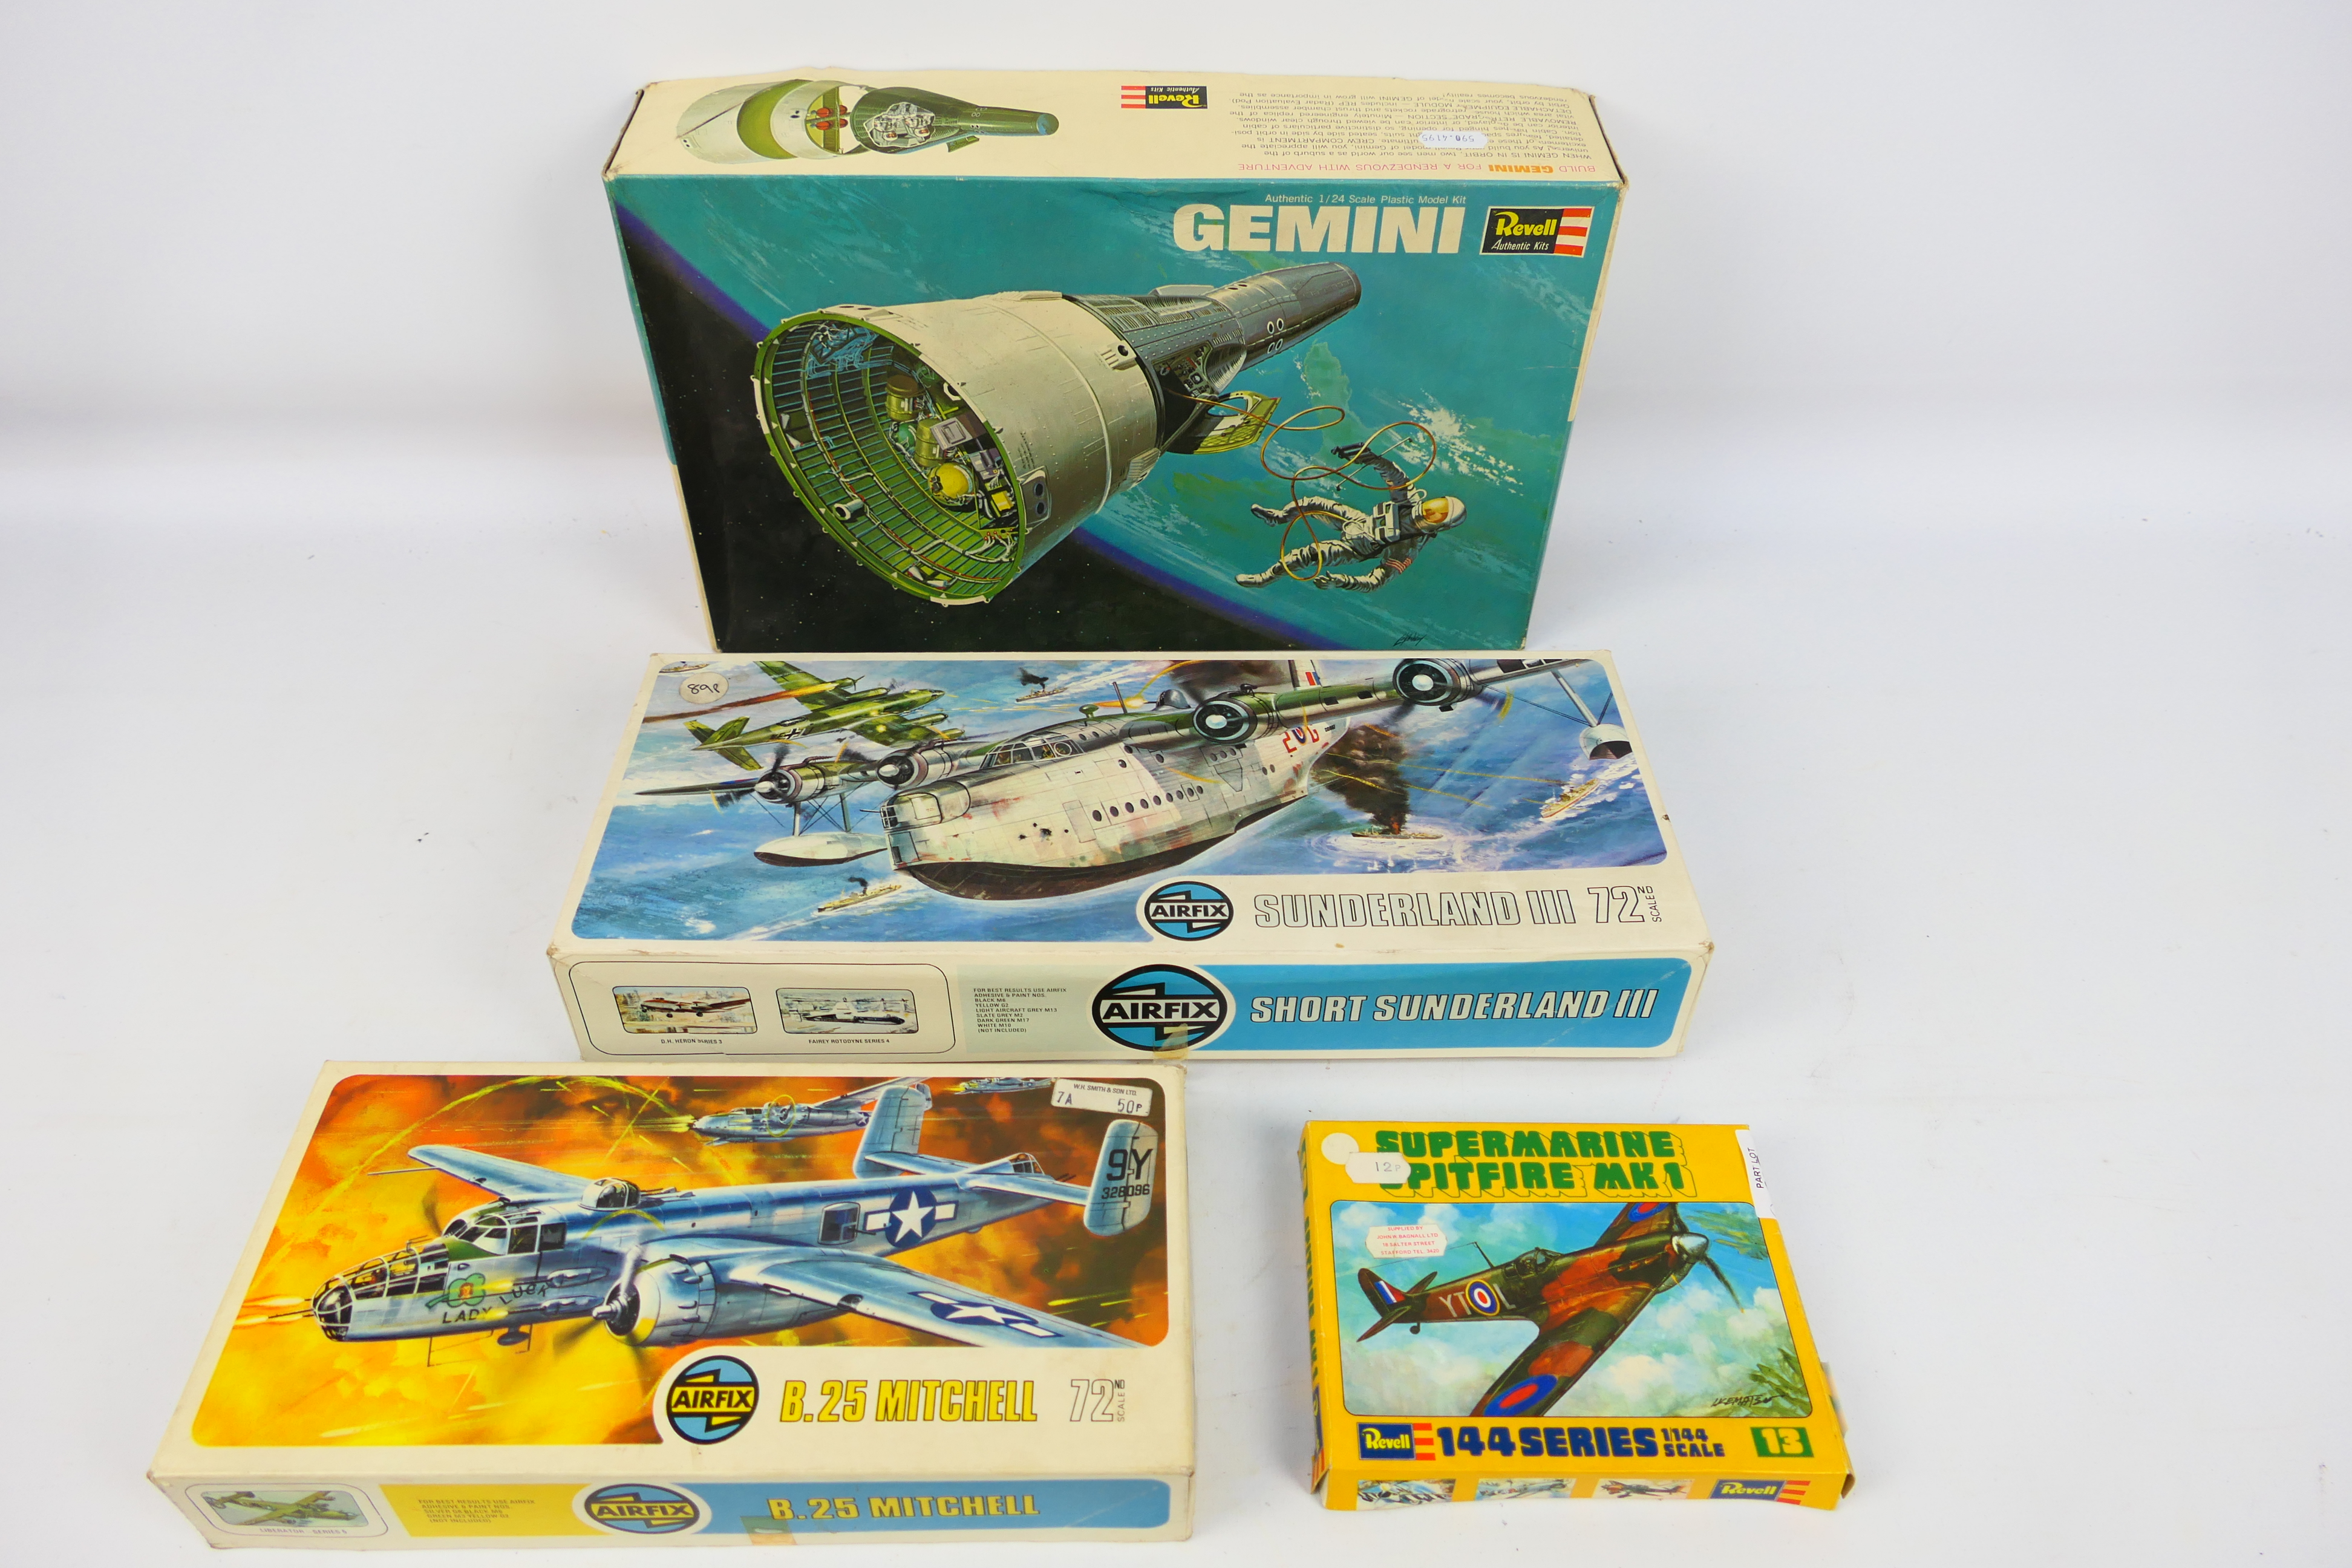 Airfix - Revell - Matchbox - 4 x vintage model kits including Gemini space capsule in 1:24 scale #